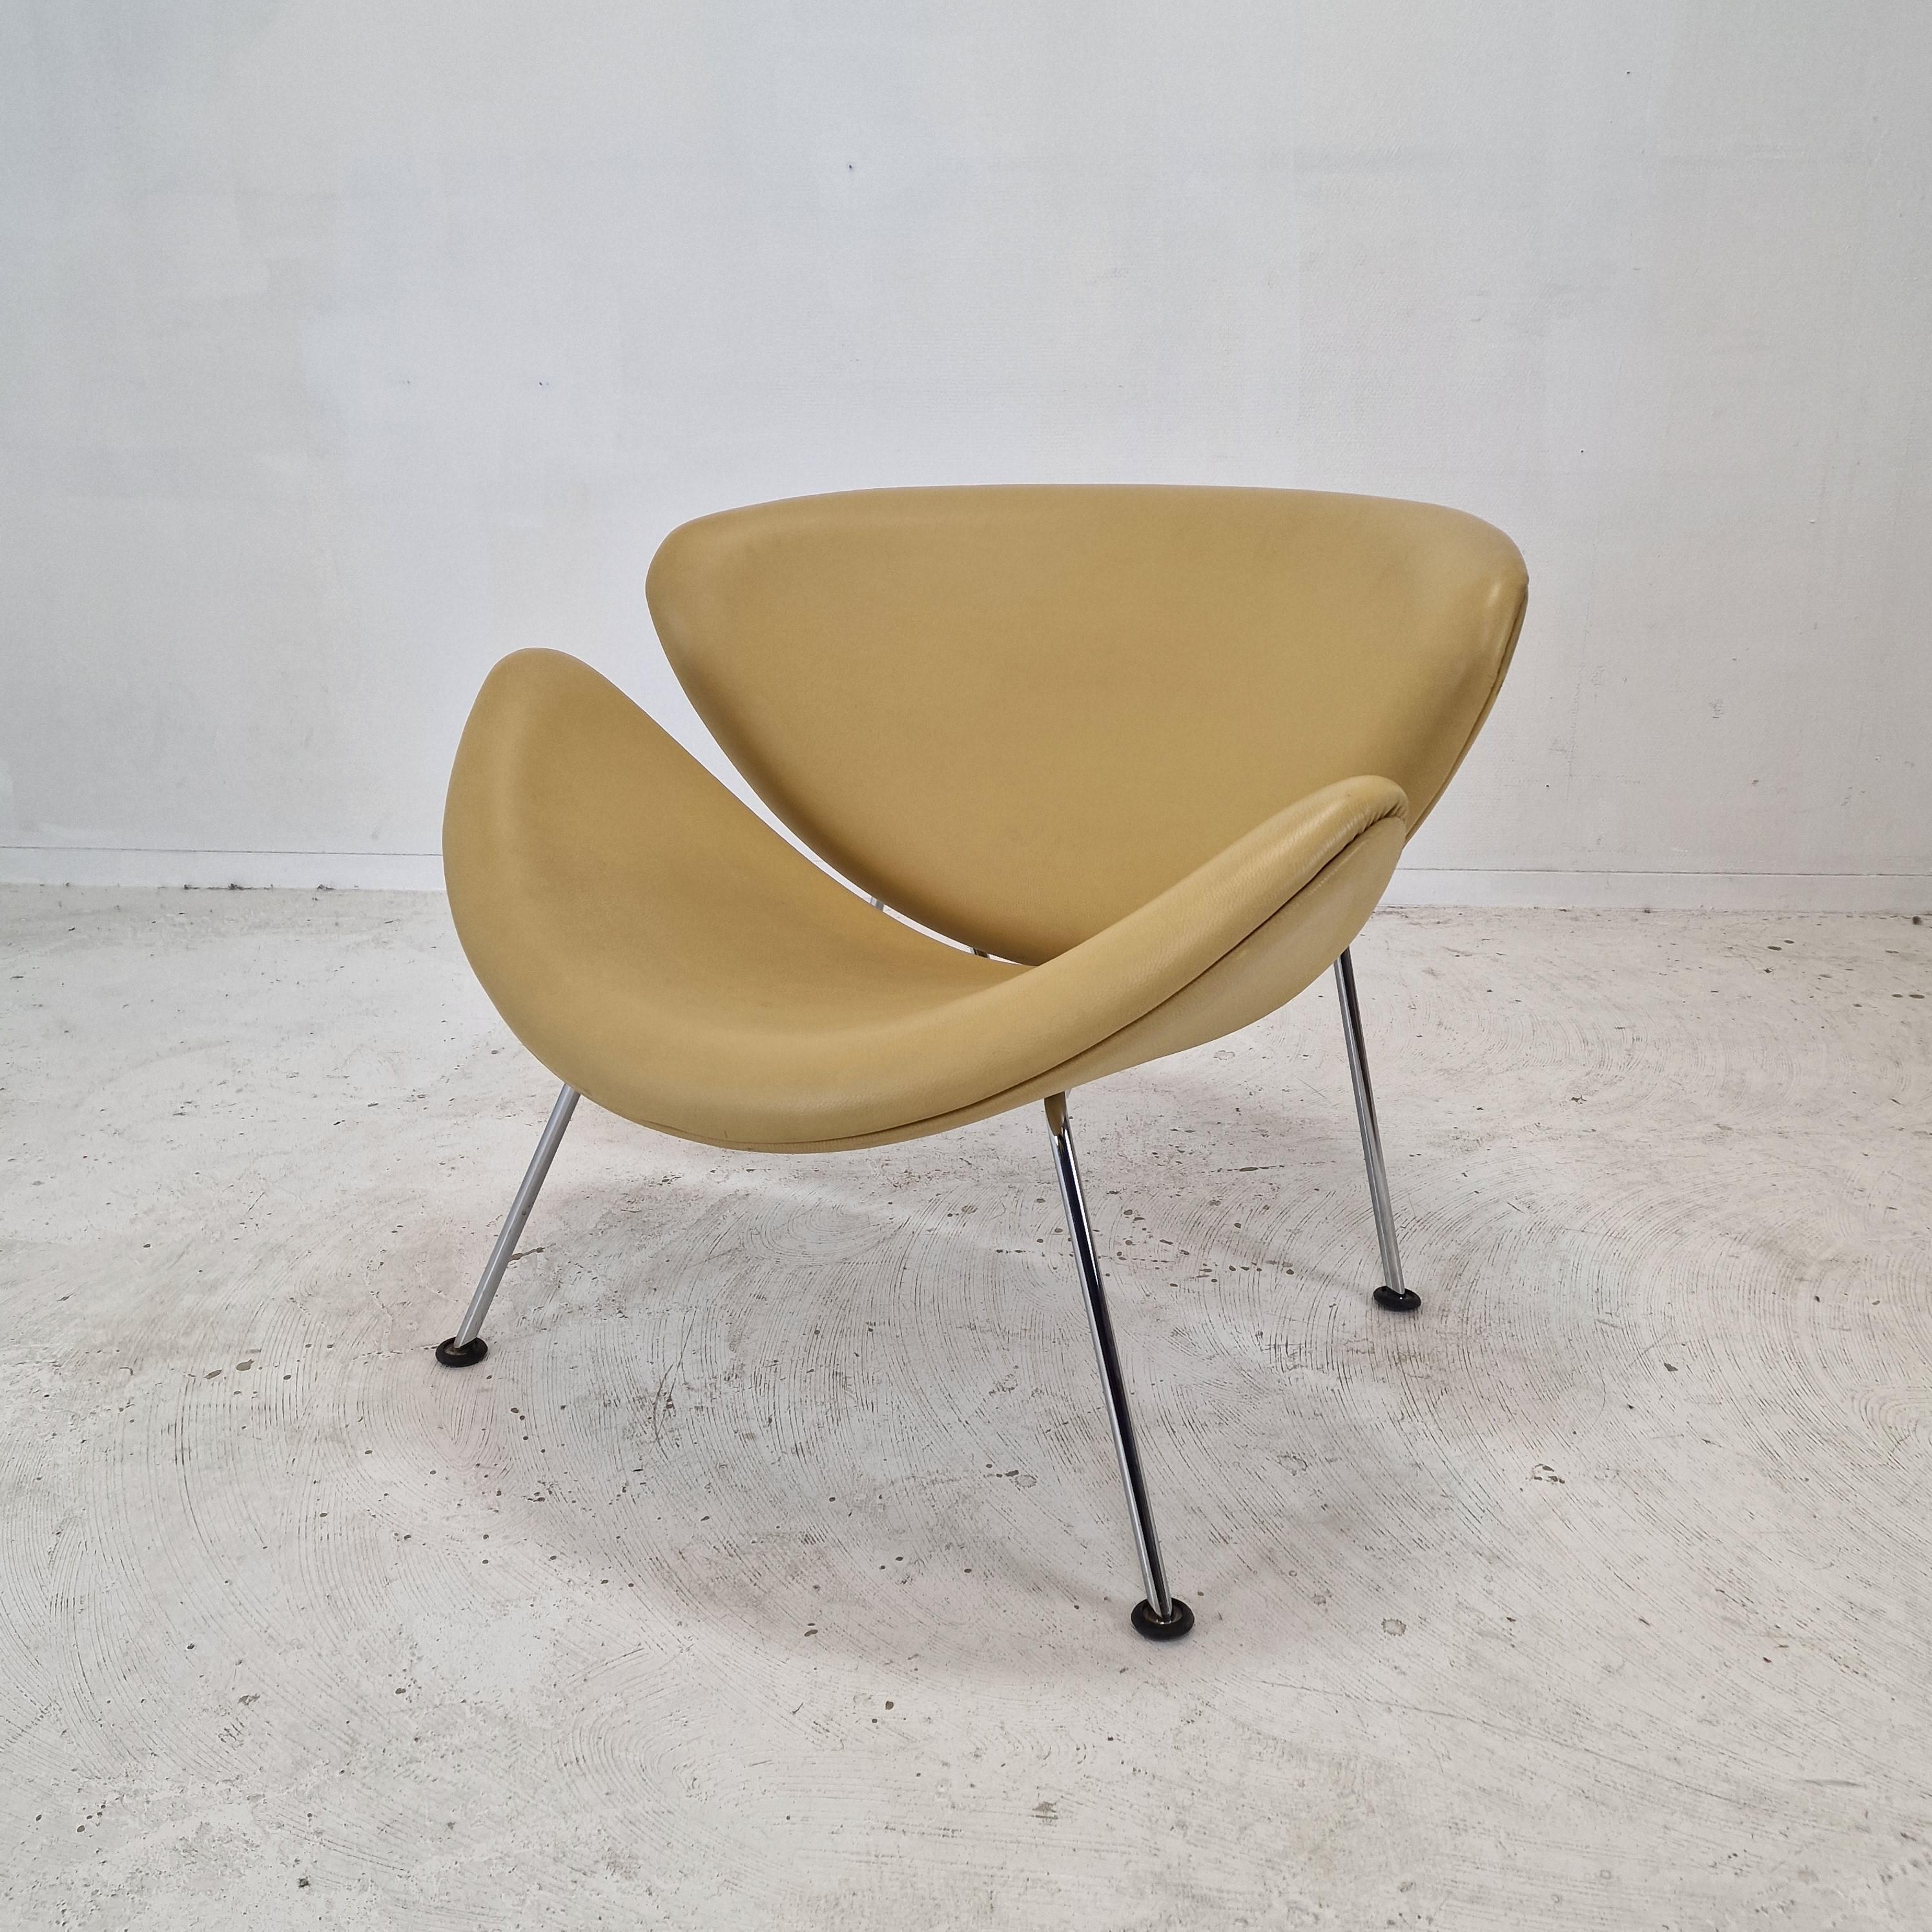 The famous Artifort orange slice chair by Pierre Paulin, designed in the 60s.
This original chair with chromed legs is produced in the 80s.

It is a cute and very comfortable chair.

It has the original high quality leather.
The leather has the